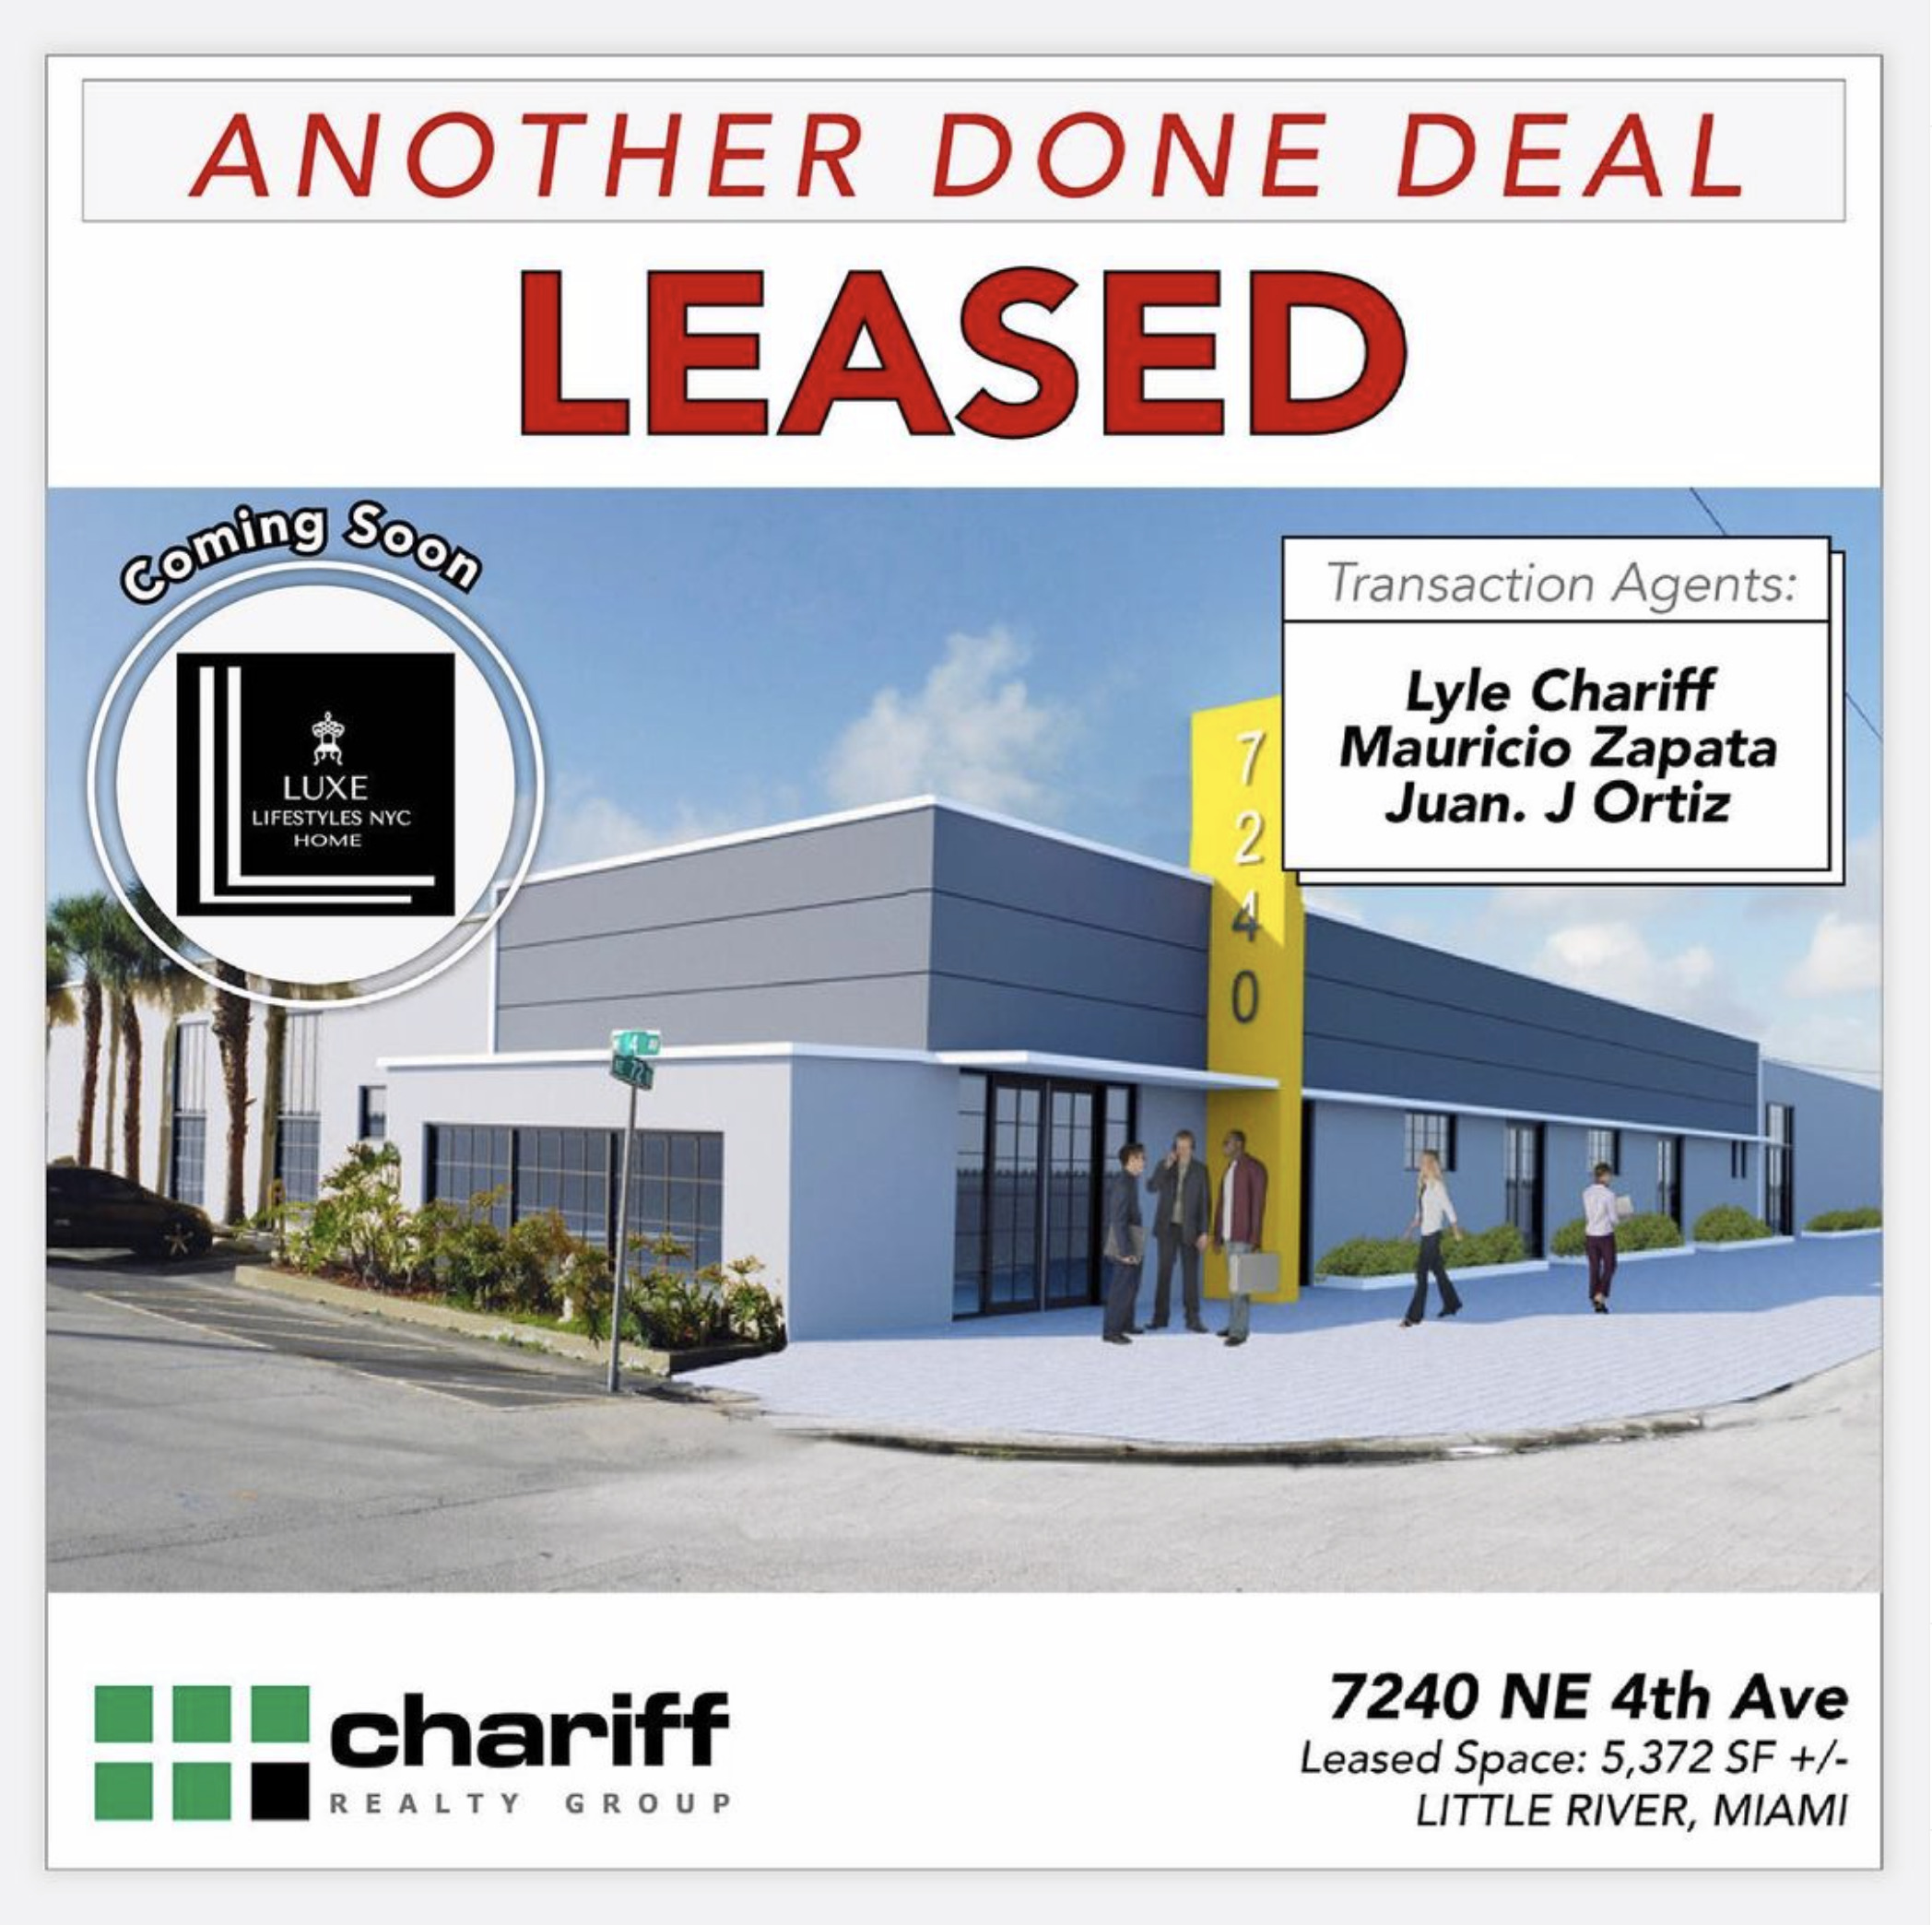 7240 NE 4th Ave - Another Done Deal-Leased-MiMo District - Miami-Florida -33138 -Chariff Realty Group